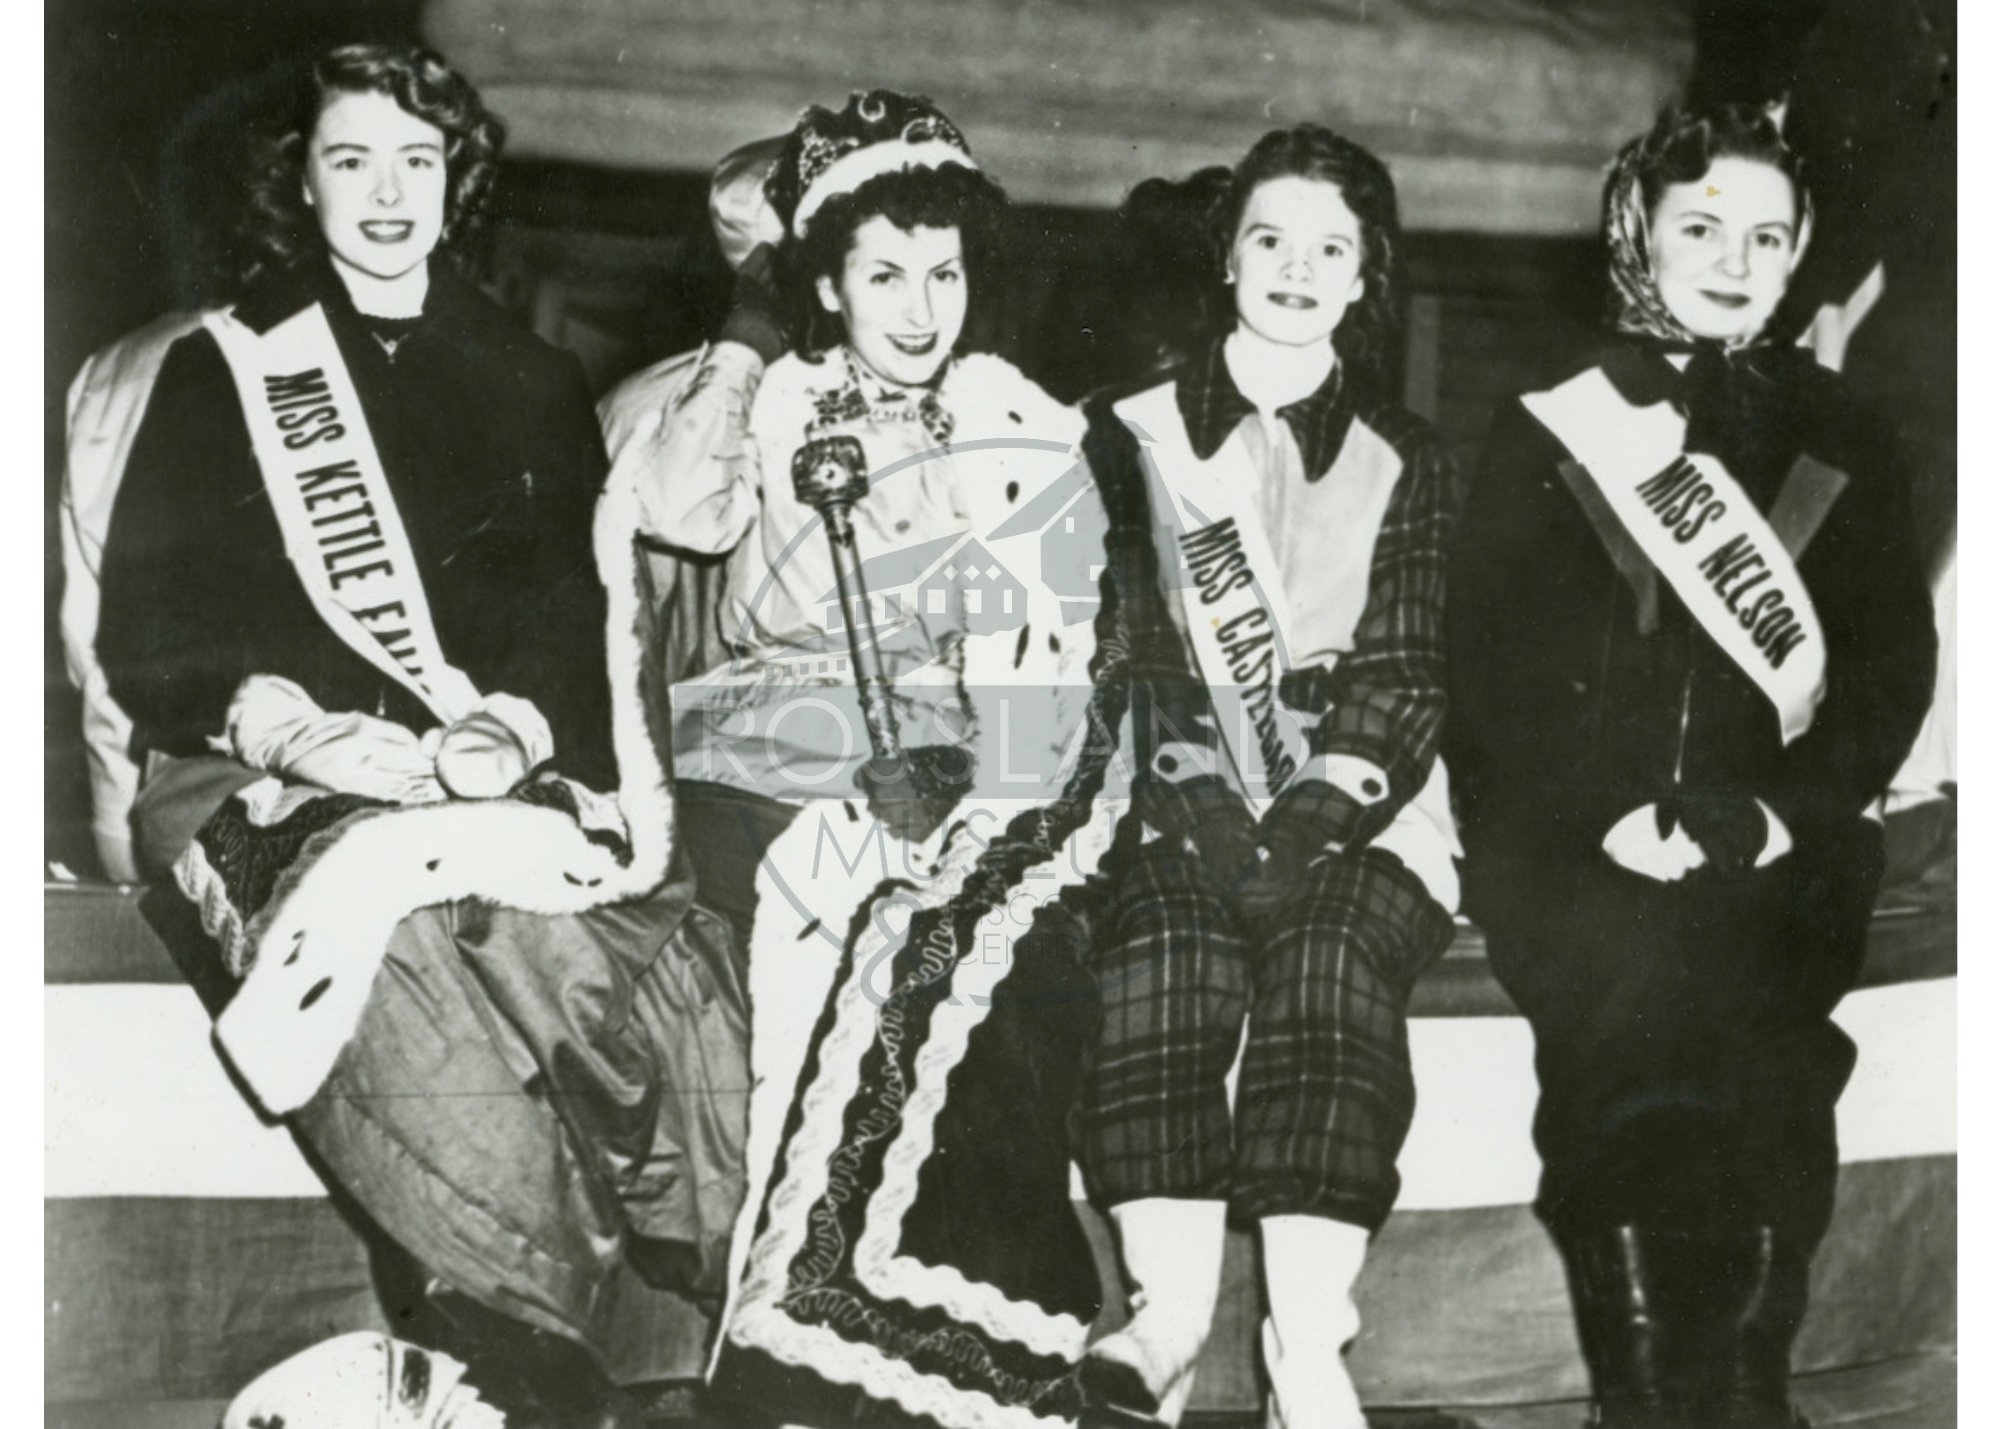   2358.0077 : Candidates for Snow Queen, February 1950.  Left to Right: Mary Lou Penwell (Kettle Falls), Lorraine Noah (1949 Snow Queen), Ellen Wallace (Castlegar), and Pauline Lebedow (Nelson). 